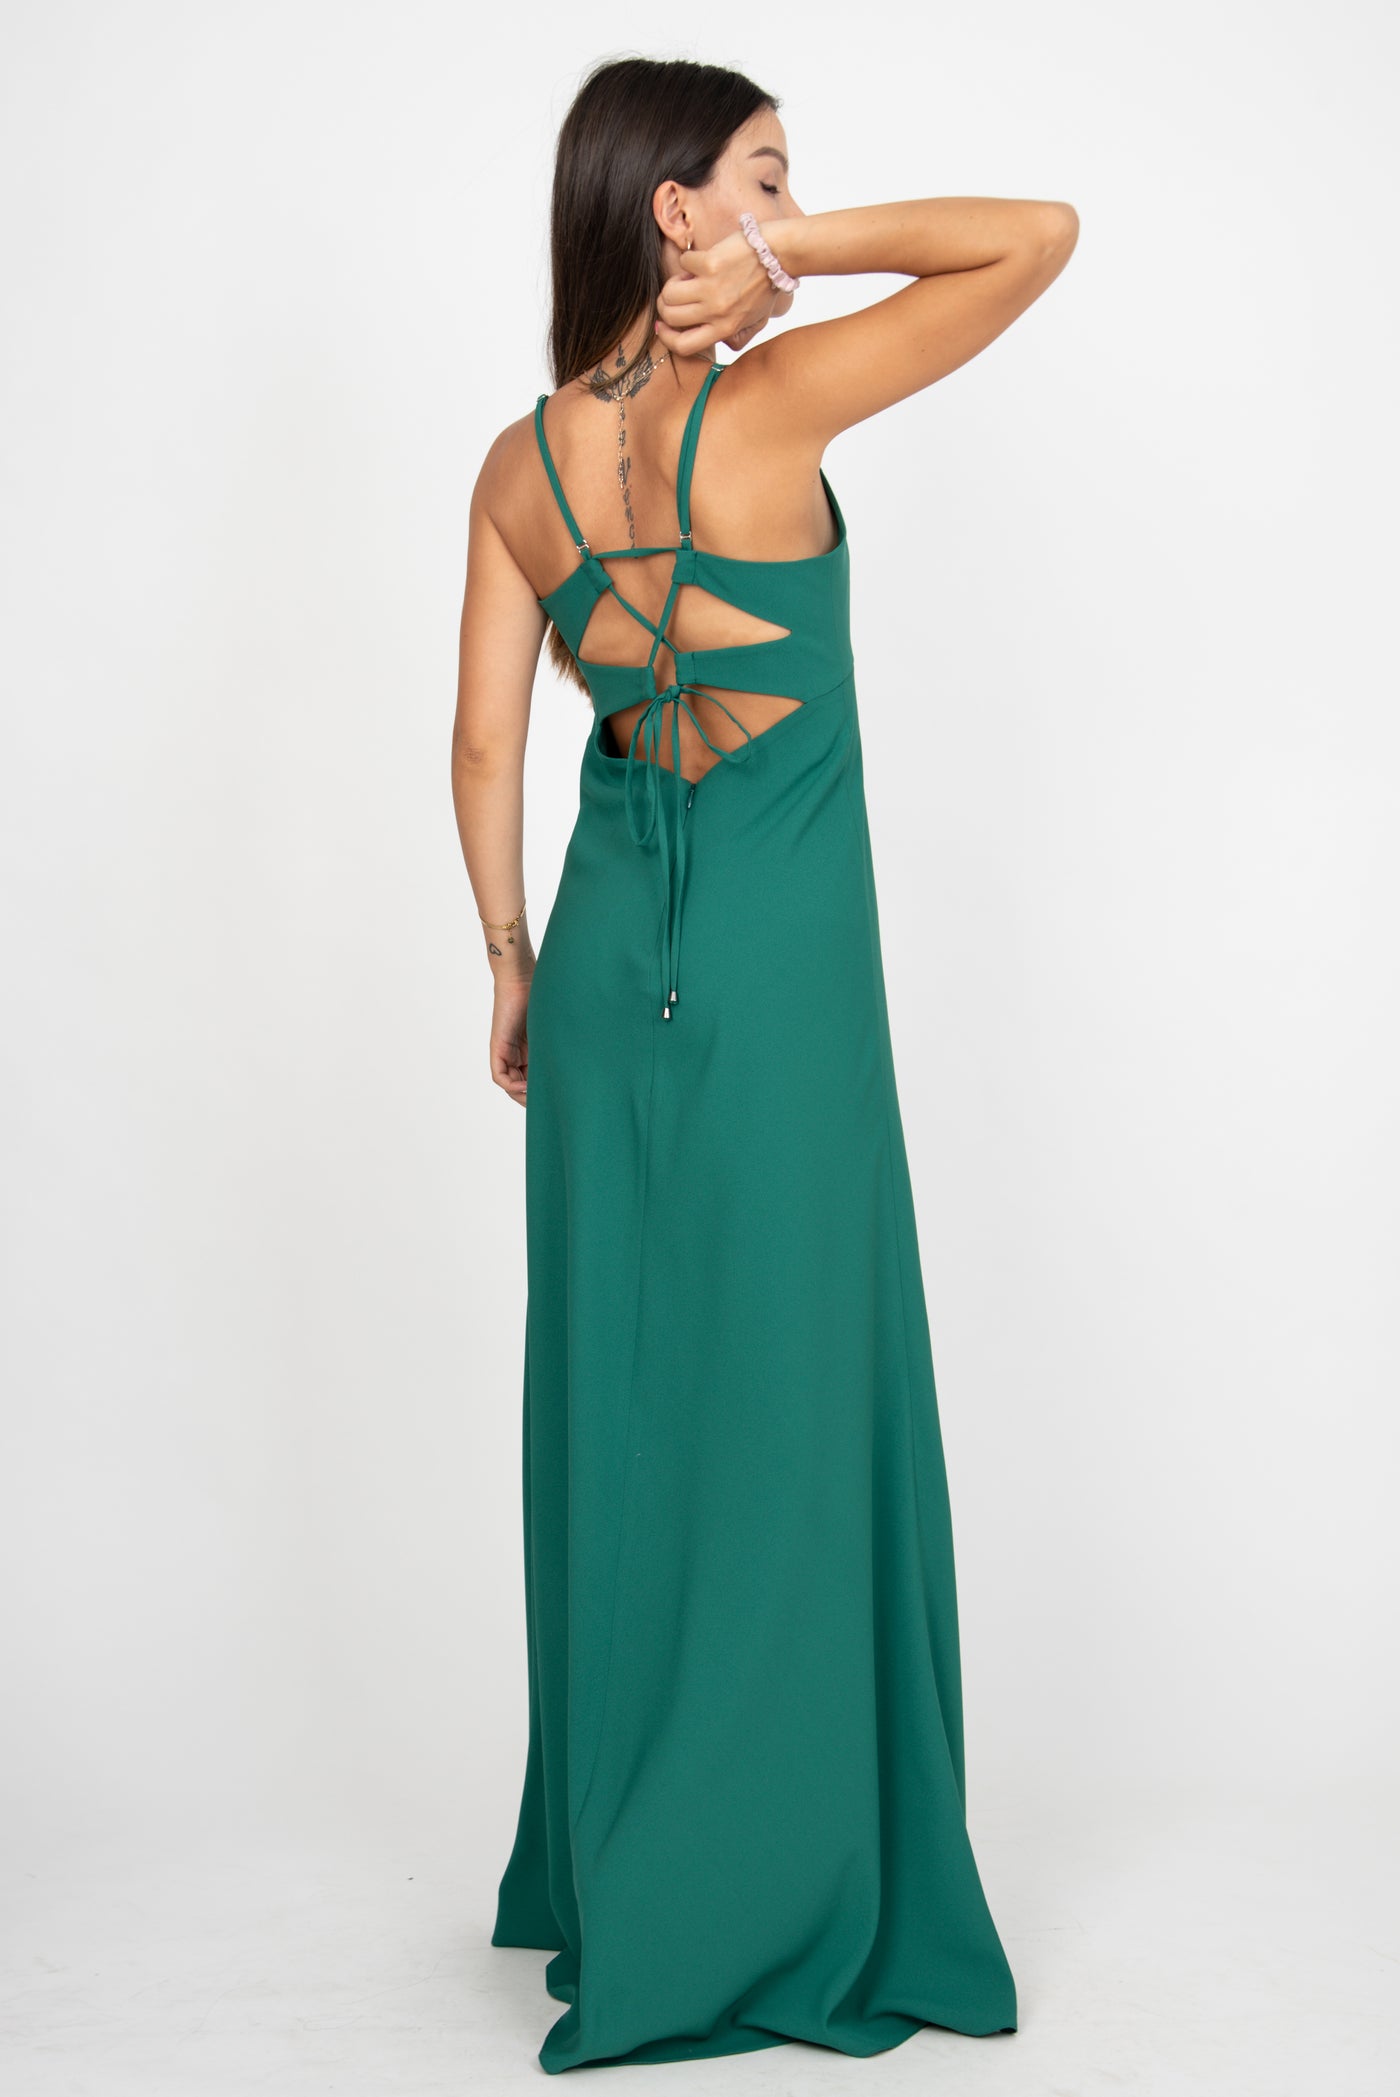 Green flowing dress with open back F2369